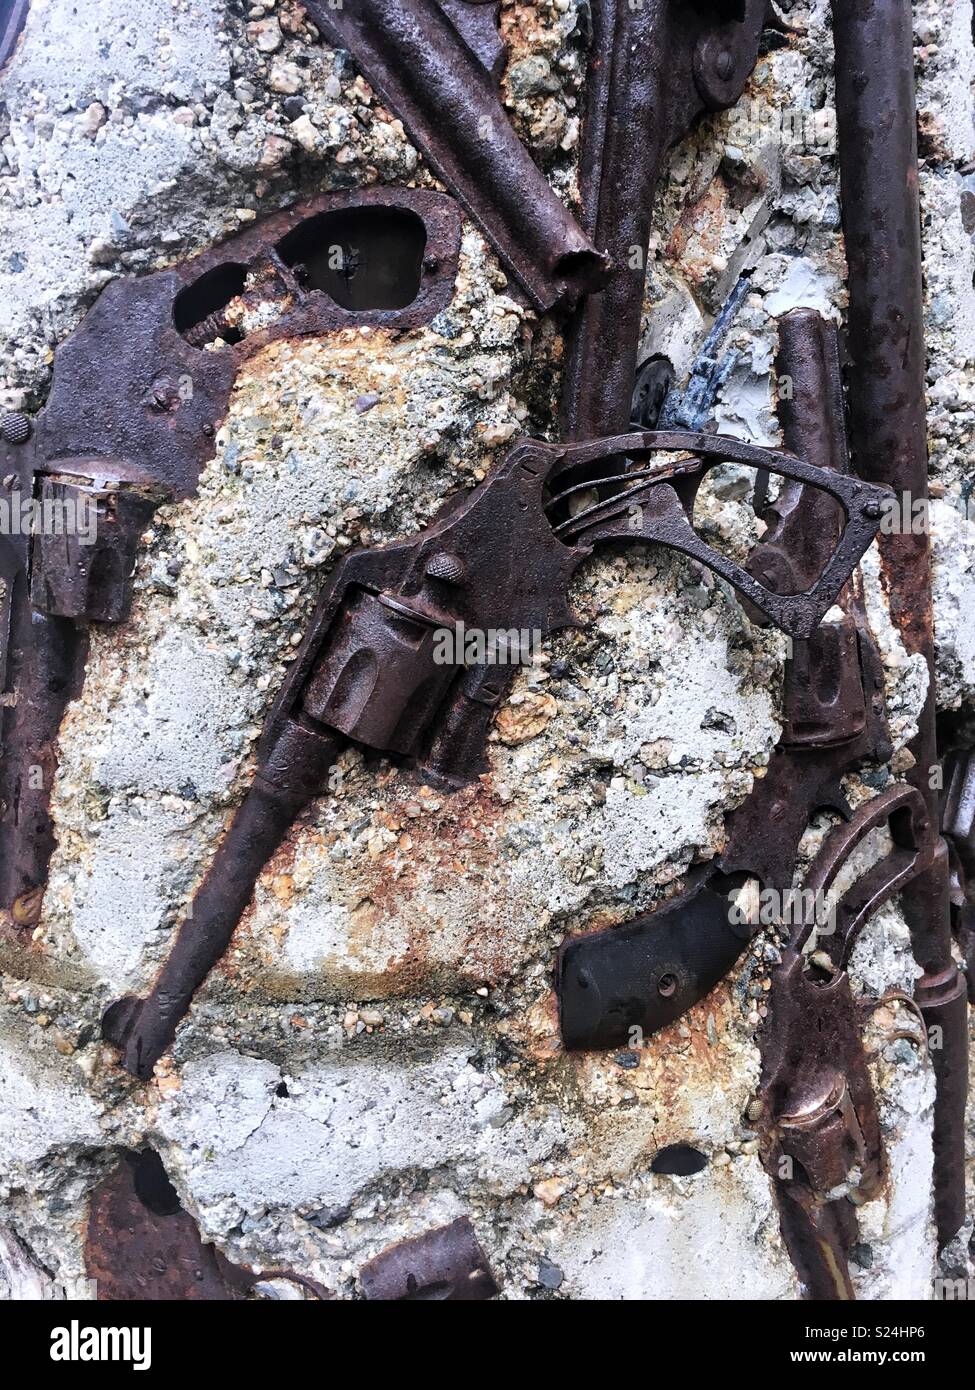 A close up of a revolver cemented in the gun totem in Providence, Rhode Island. Stock Photo